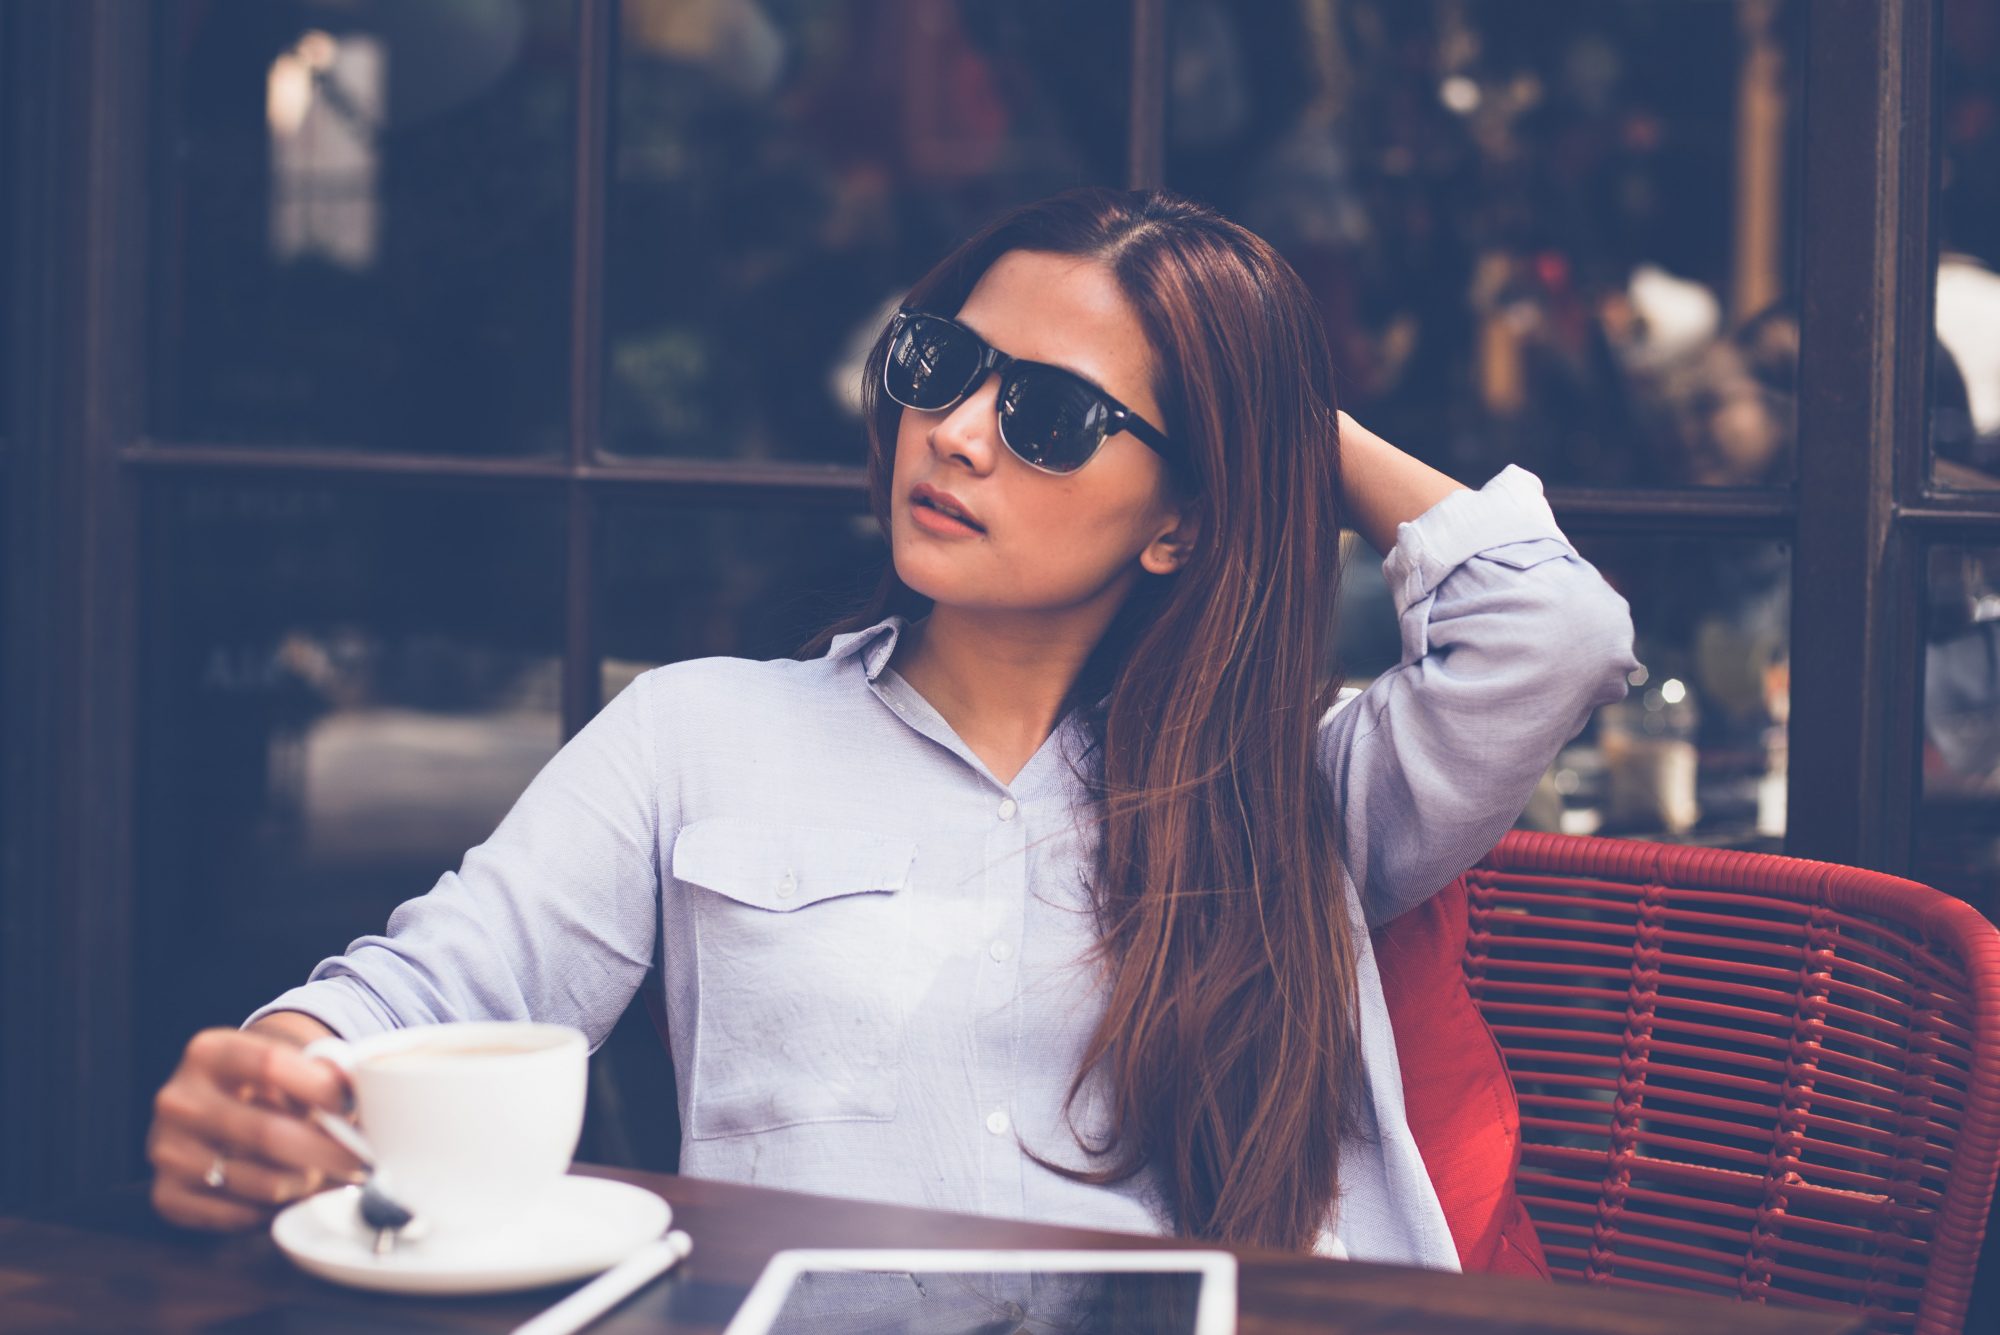 stylish young woman having coffee at an outdoor cafe patio